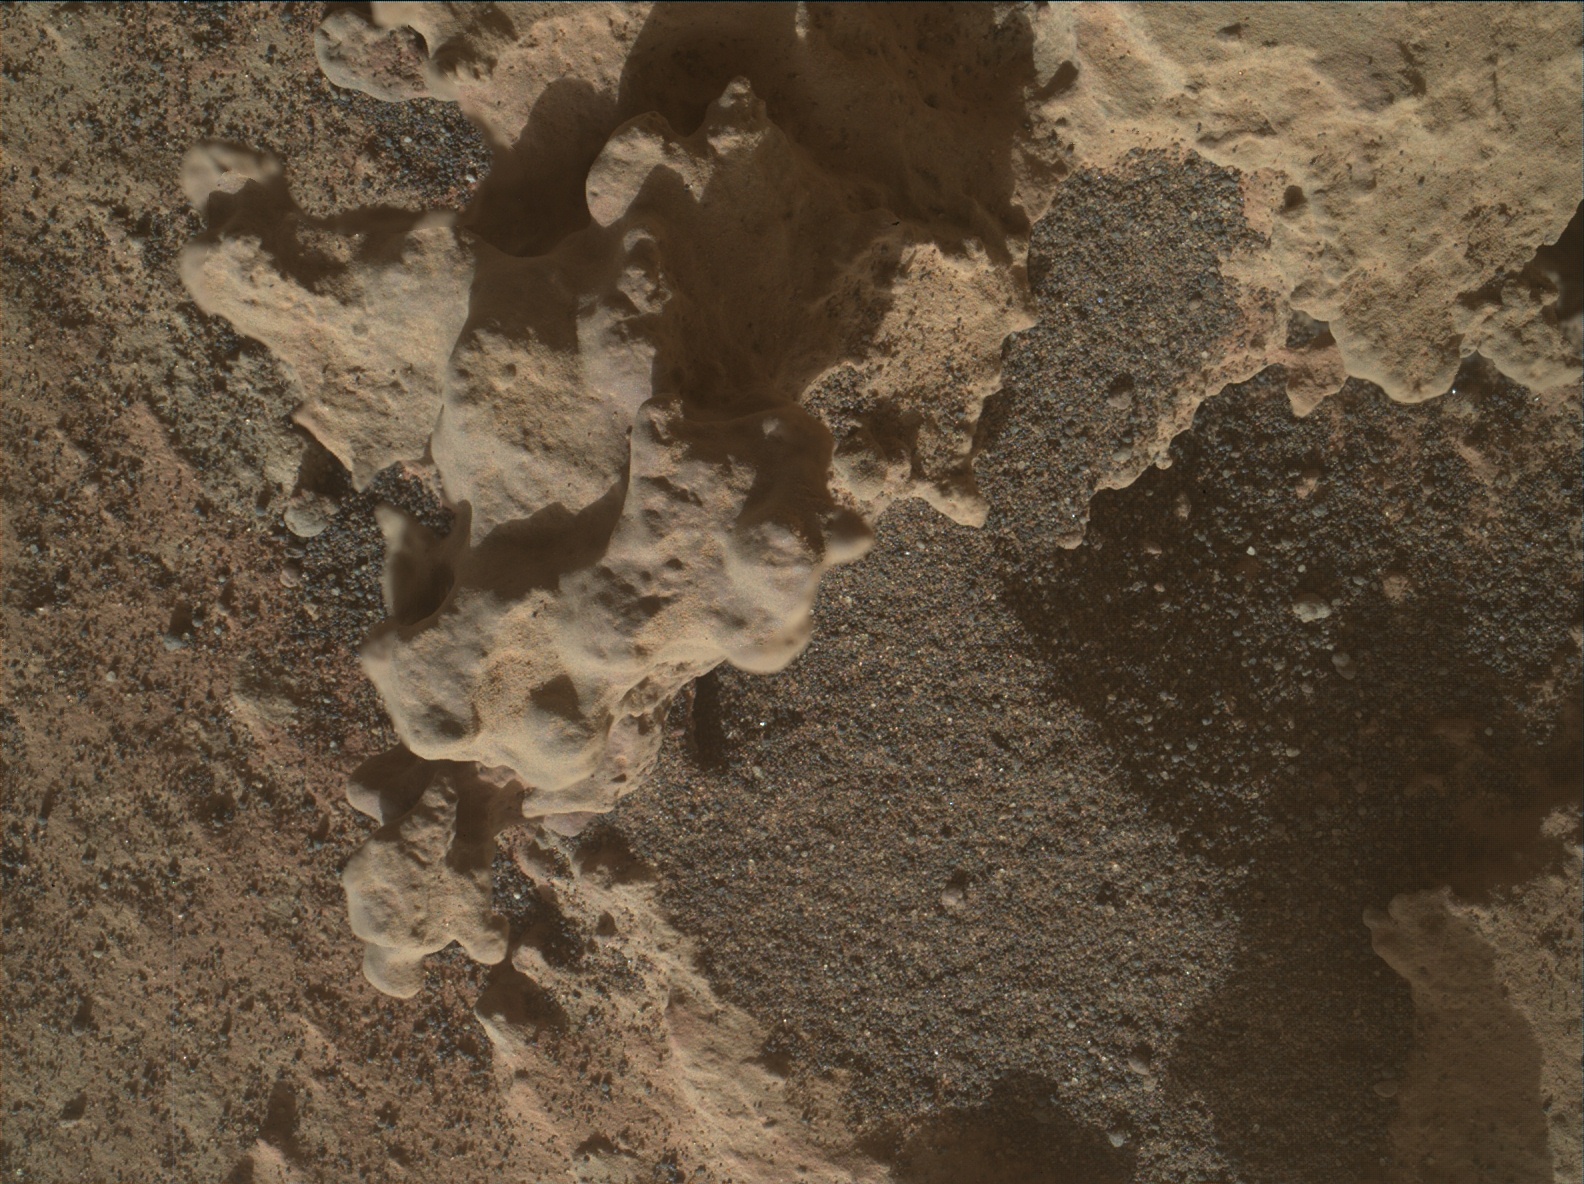 Nasa's Mars rover Curiosity acquired this image using its Mars Hand Lens Imager (MAHLI) on Sol 3147